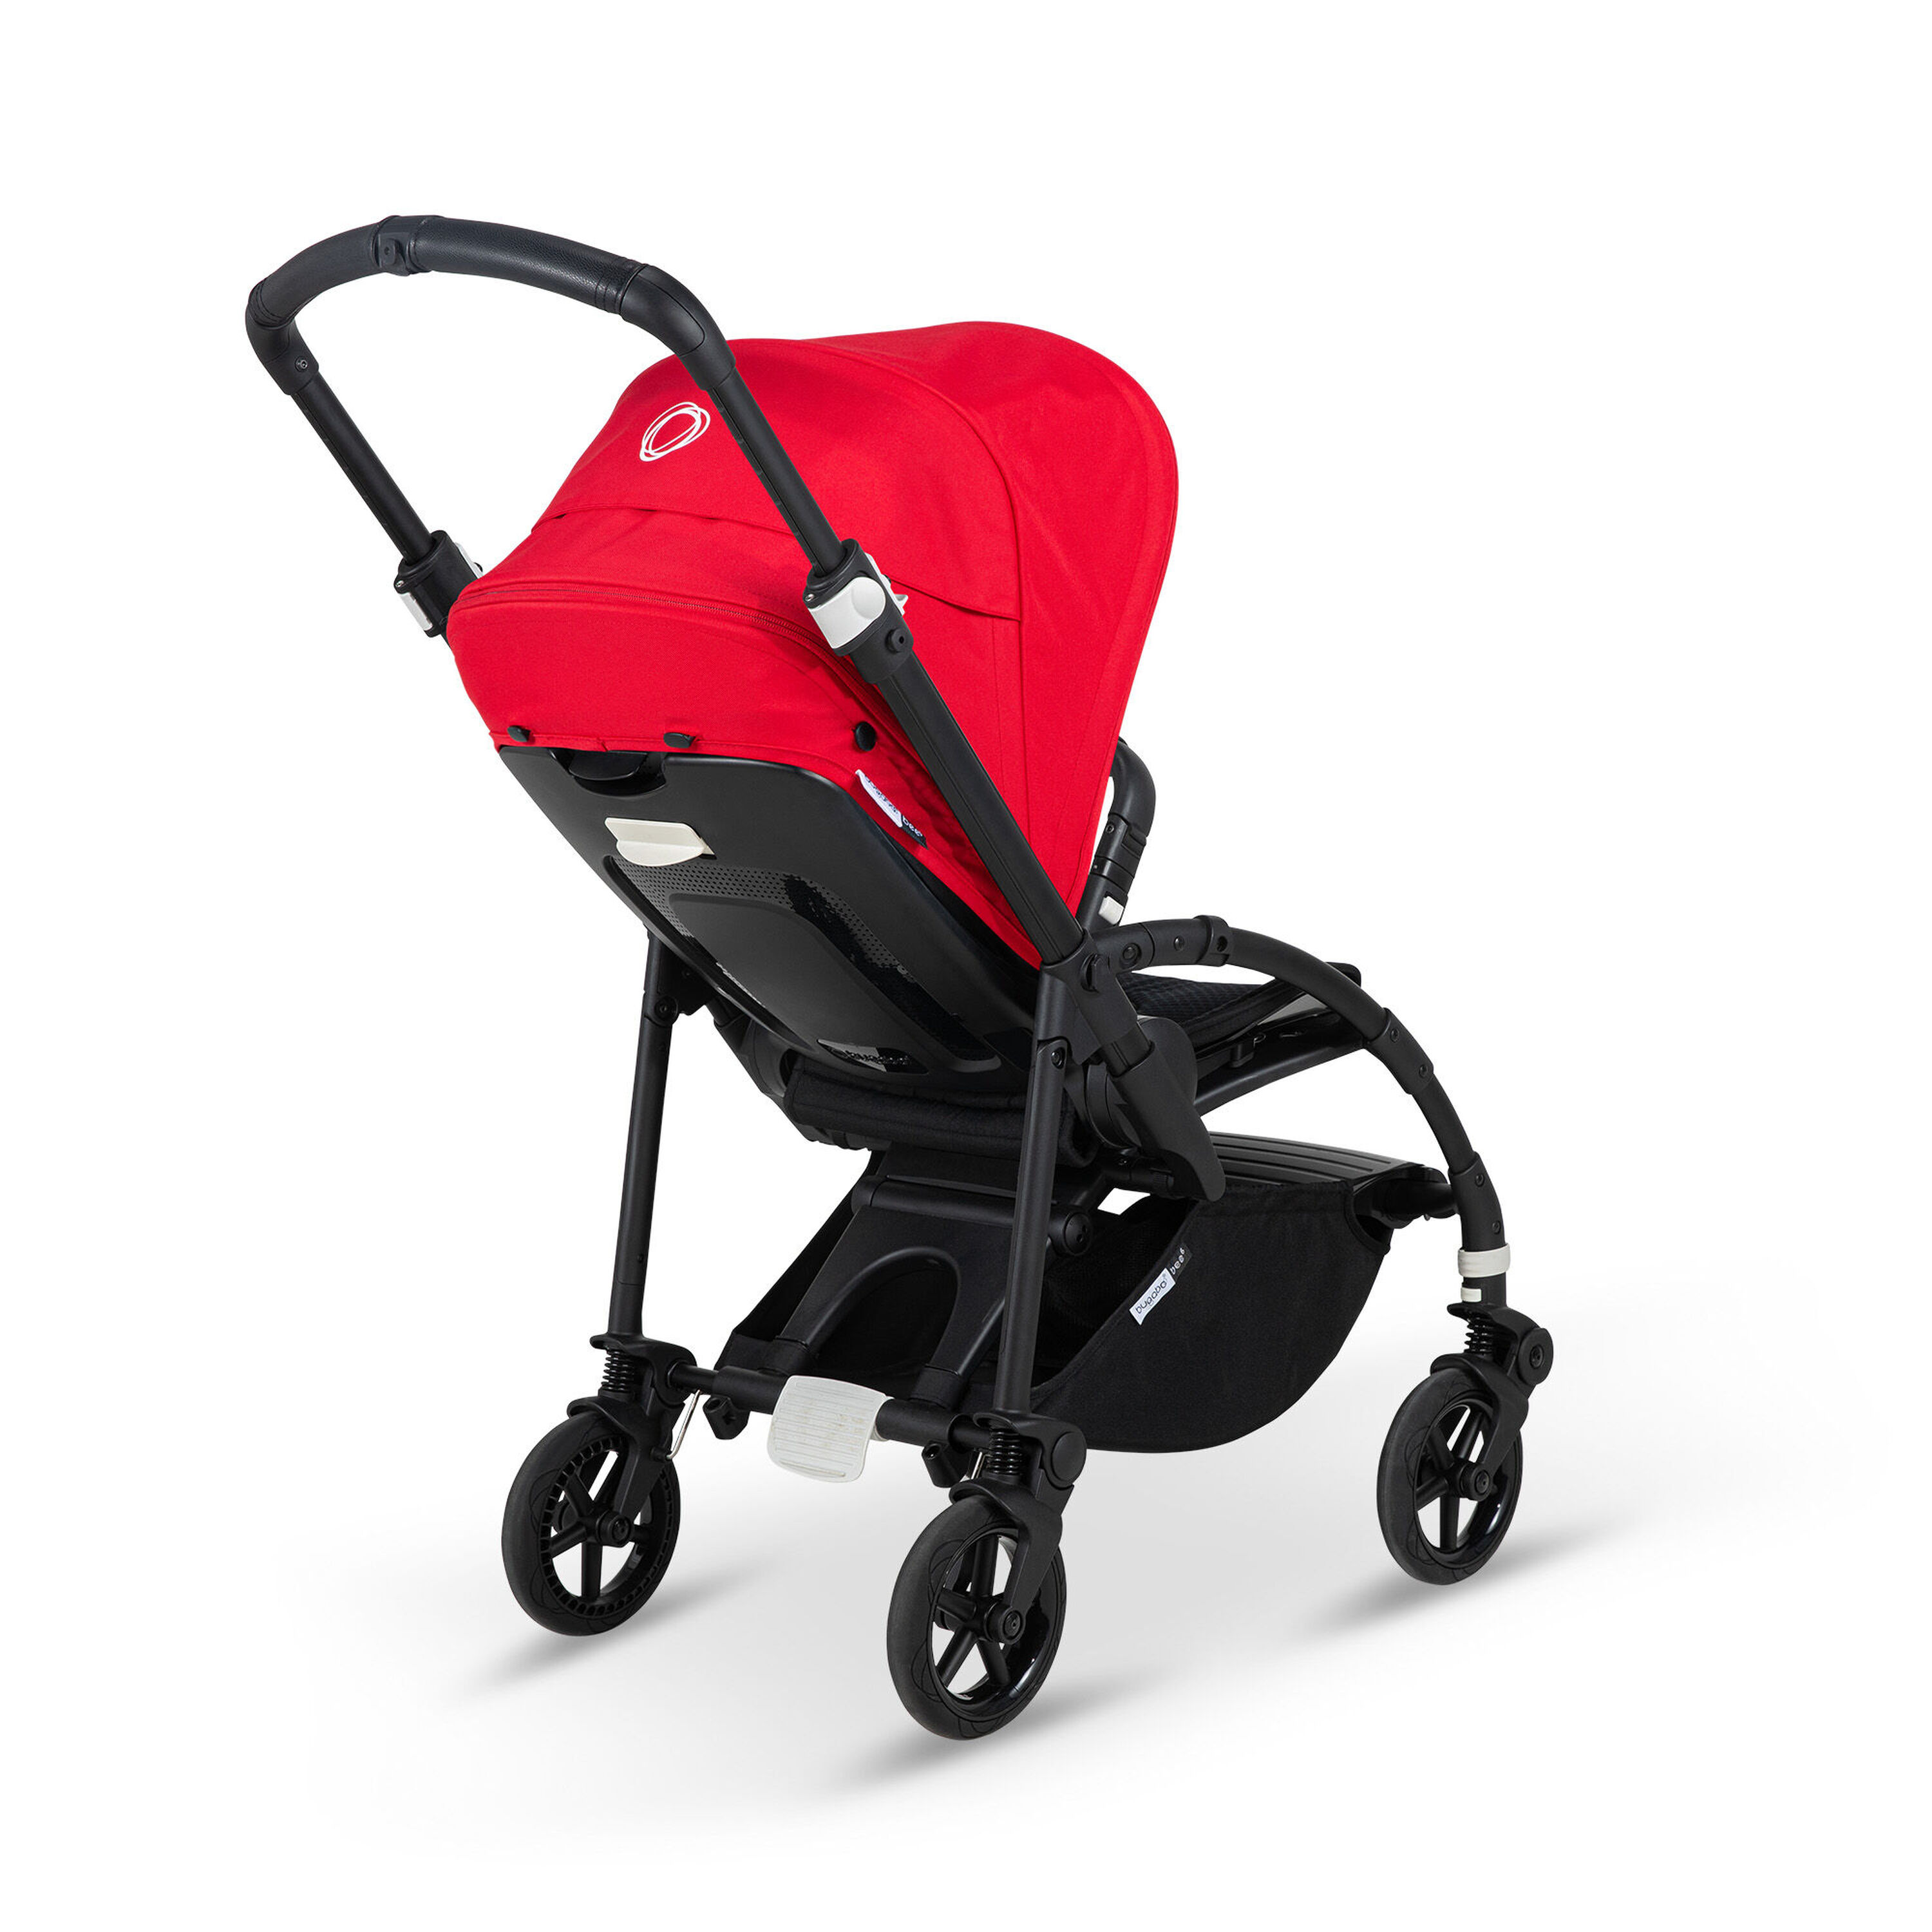  Bugaboo Bee 6 Extendable Sun Canopy with UPF Sun Protection and  Peekaboo Mesh Panel, Compatible with Bee 3 and Bee 5 Models - Lemon Yellow  : Everything Else